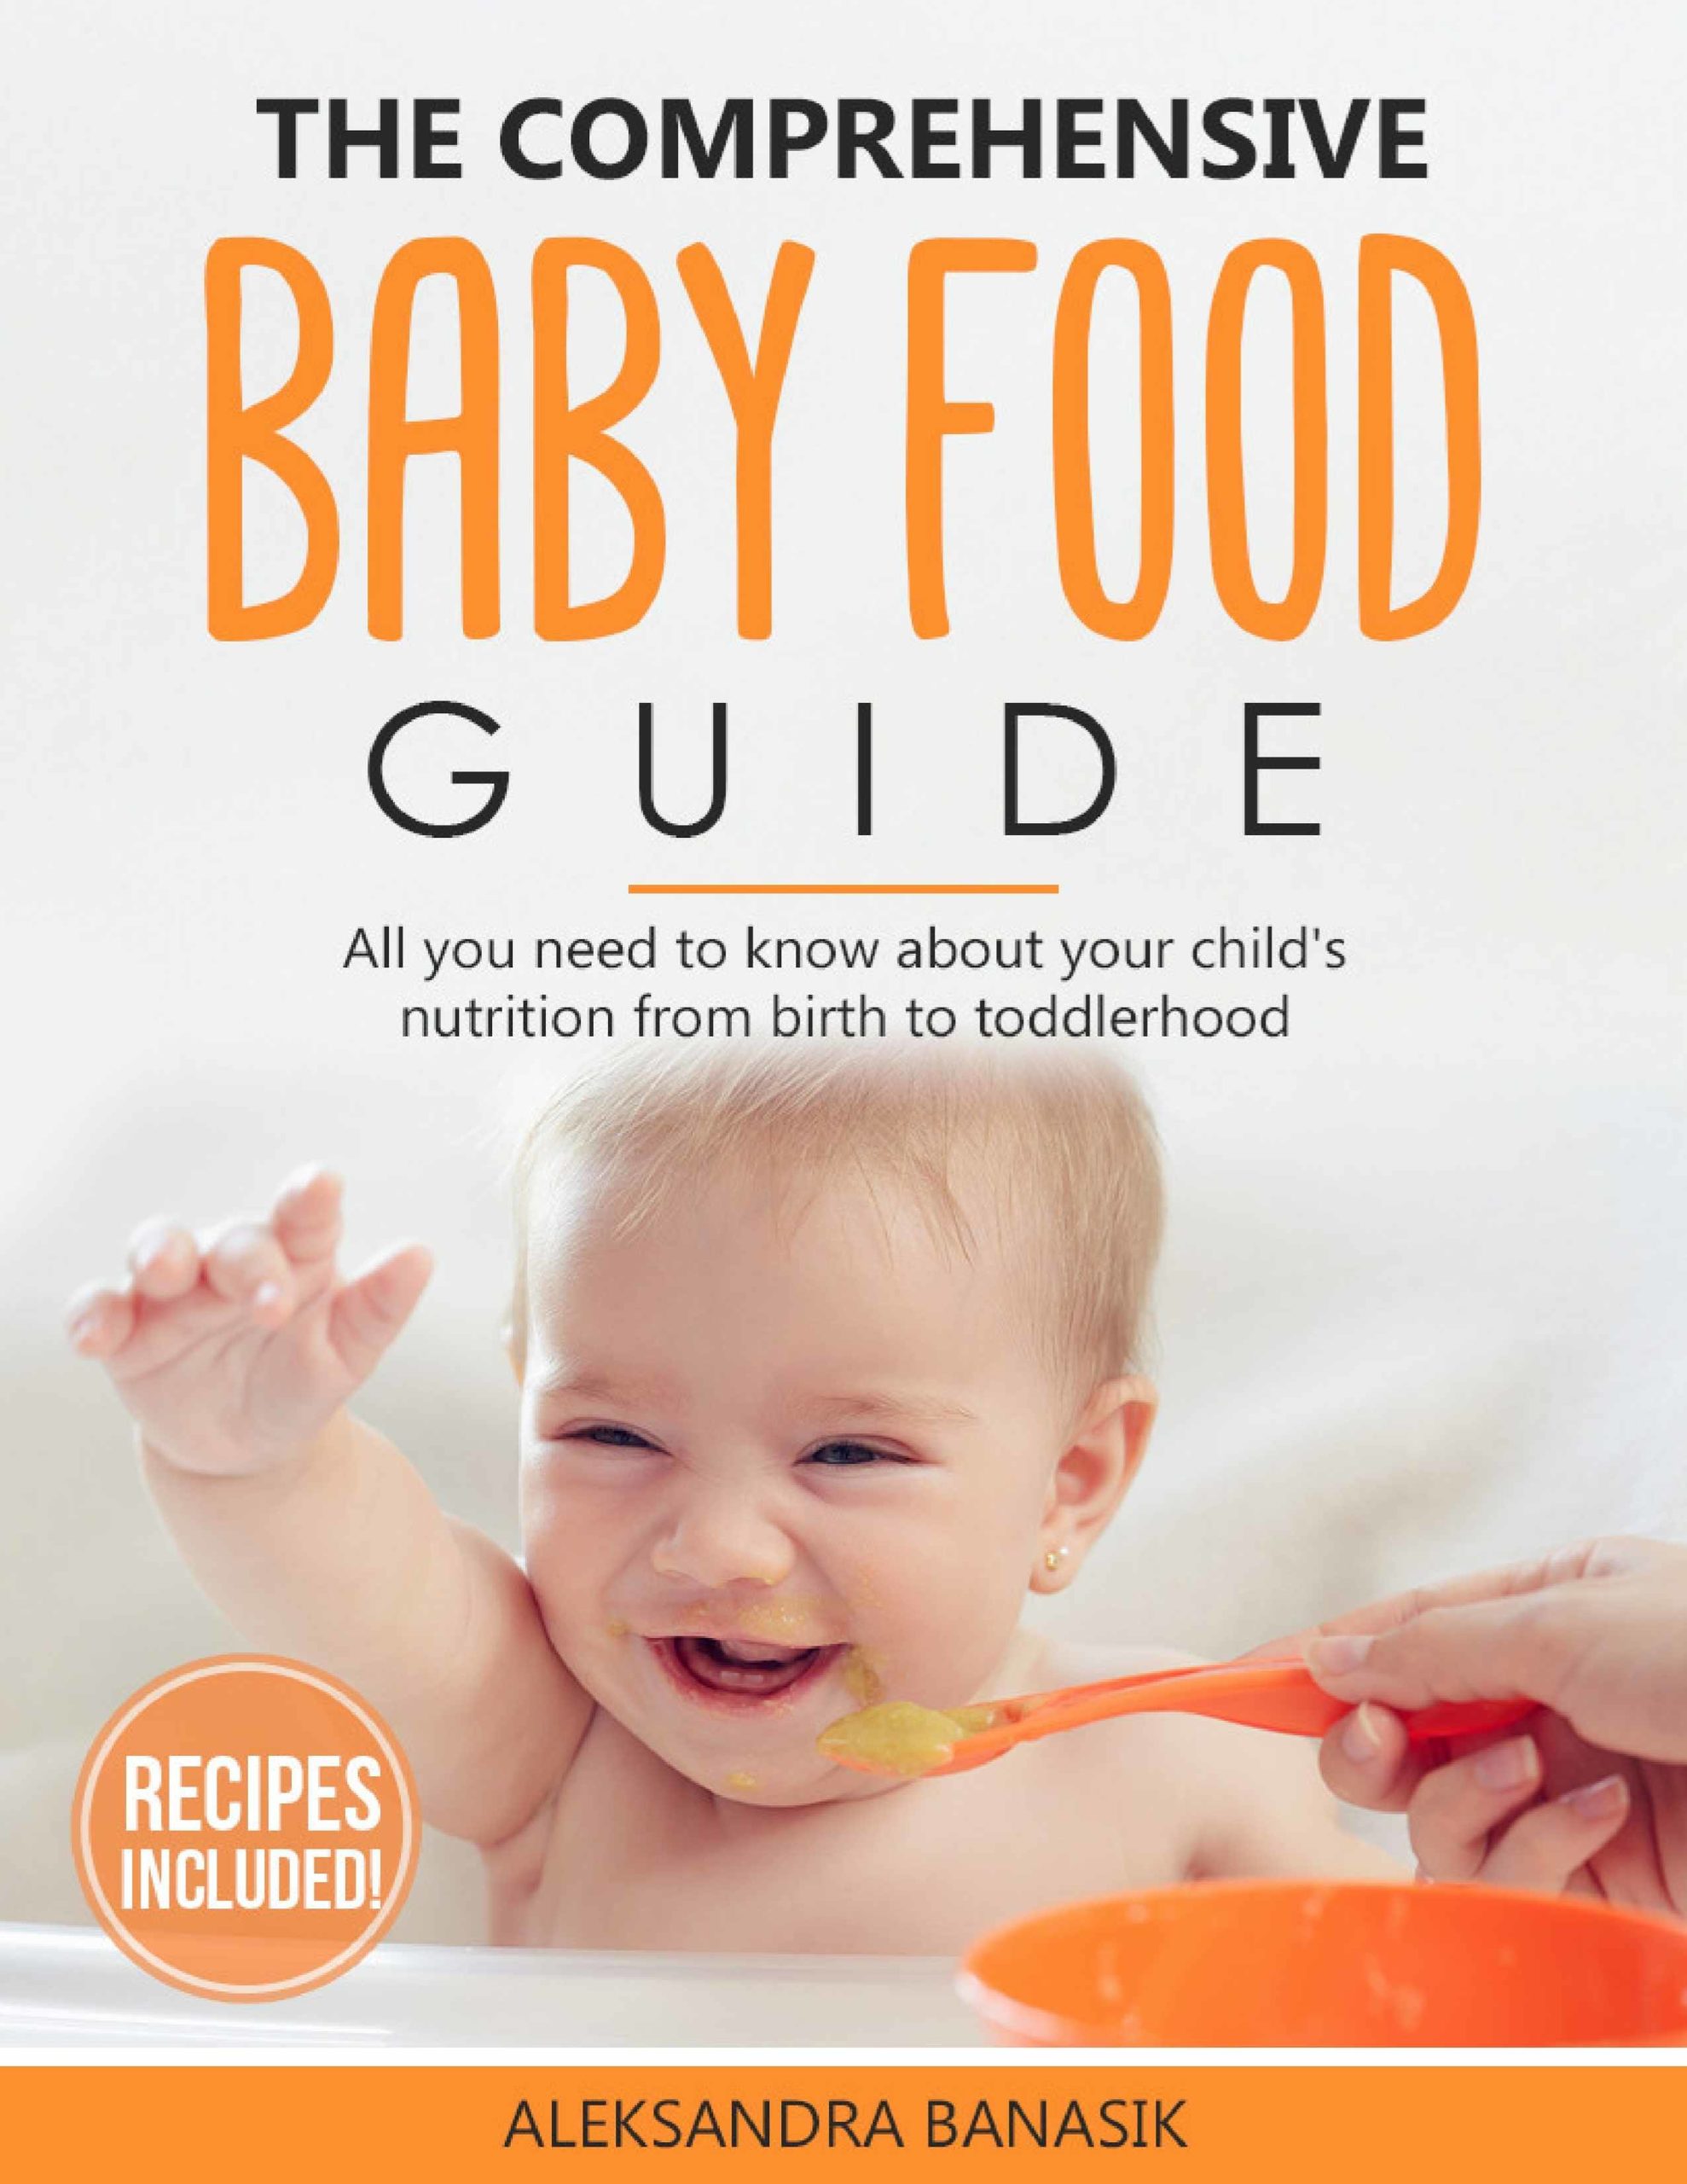 Baby Food Guide eBook with recipes for babies and toddlers, number 1 selling baby food guide provides all you need to know about your child's nutrition from birth to toddlerhood!. Professional advice and tips, solid foods, baby-led weaning. Chewing Toy Best Baby Teething Toy